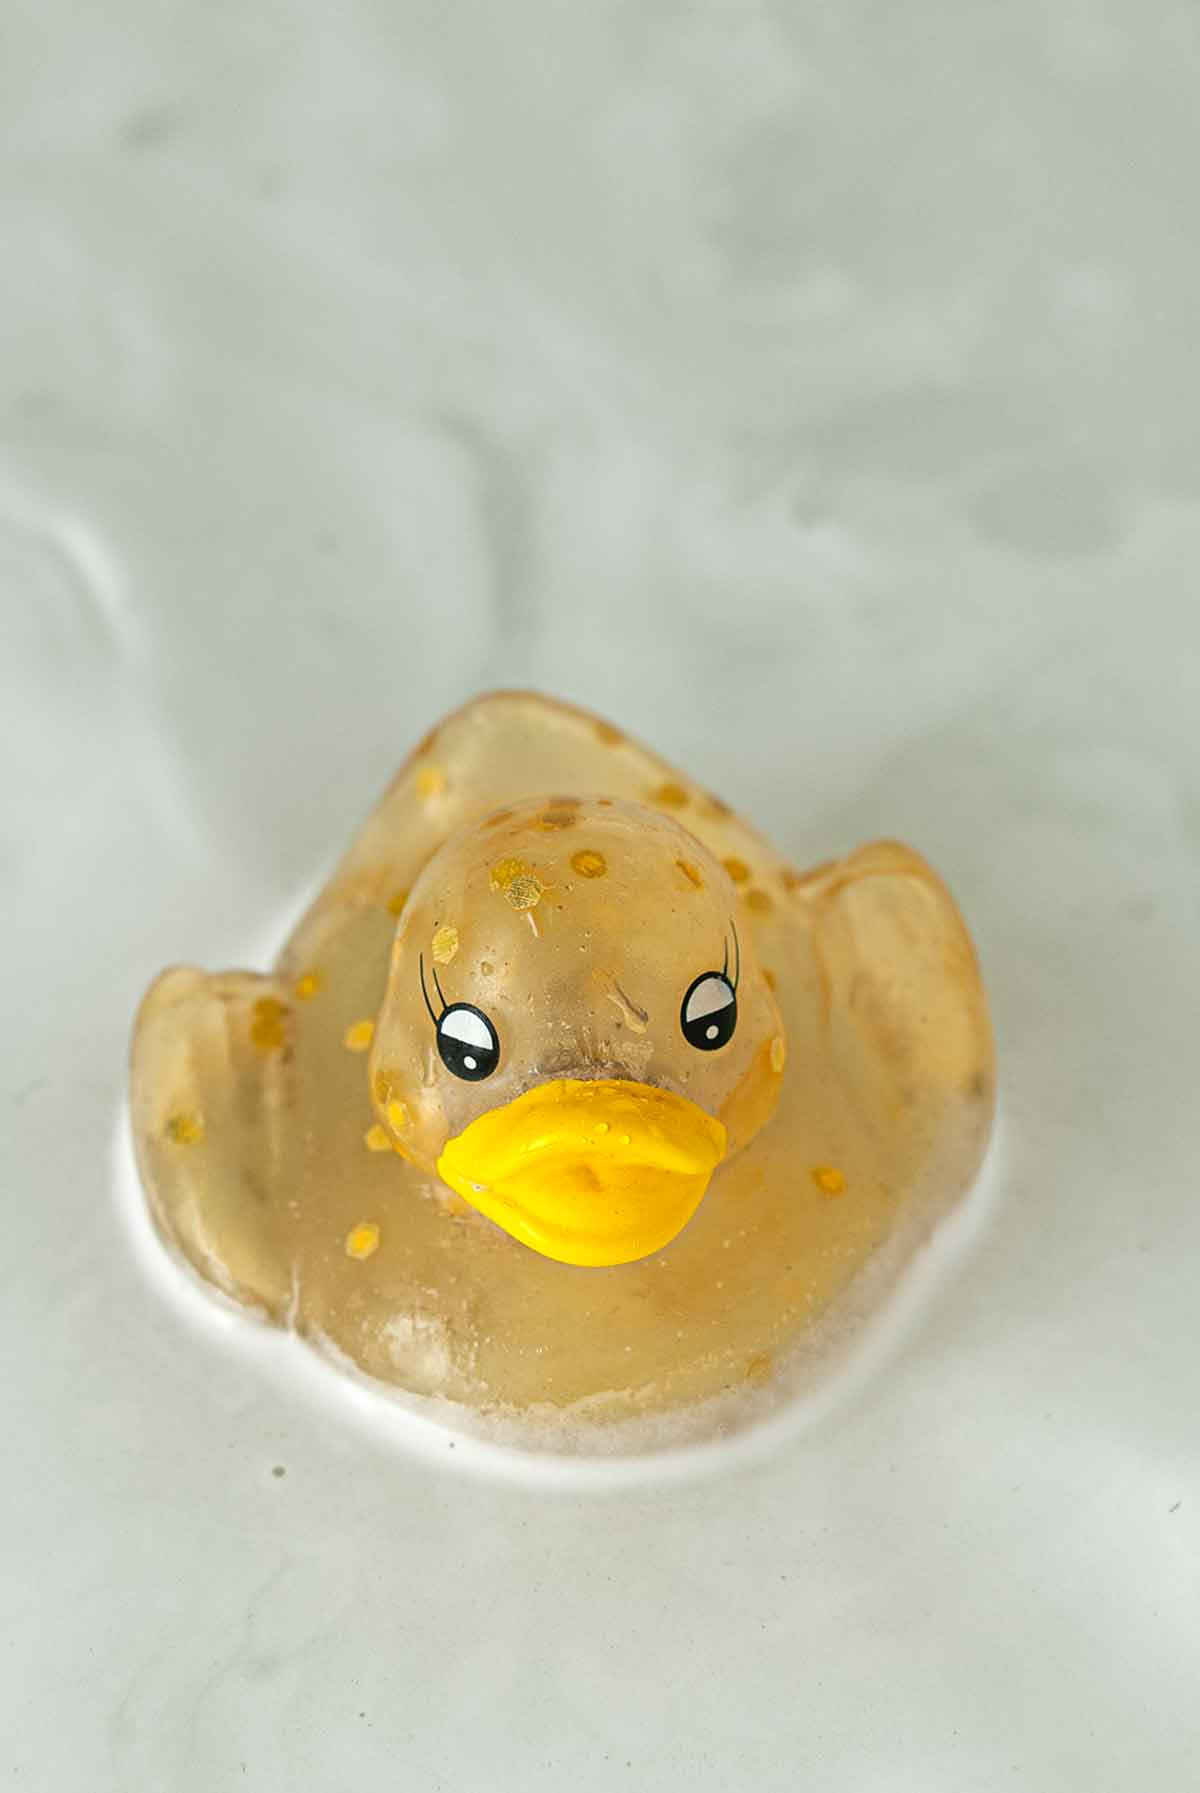 A rubber duck in froth.